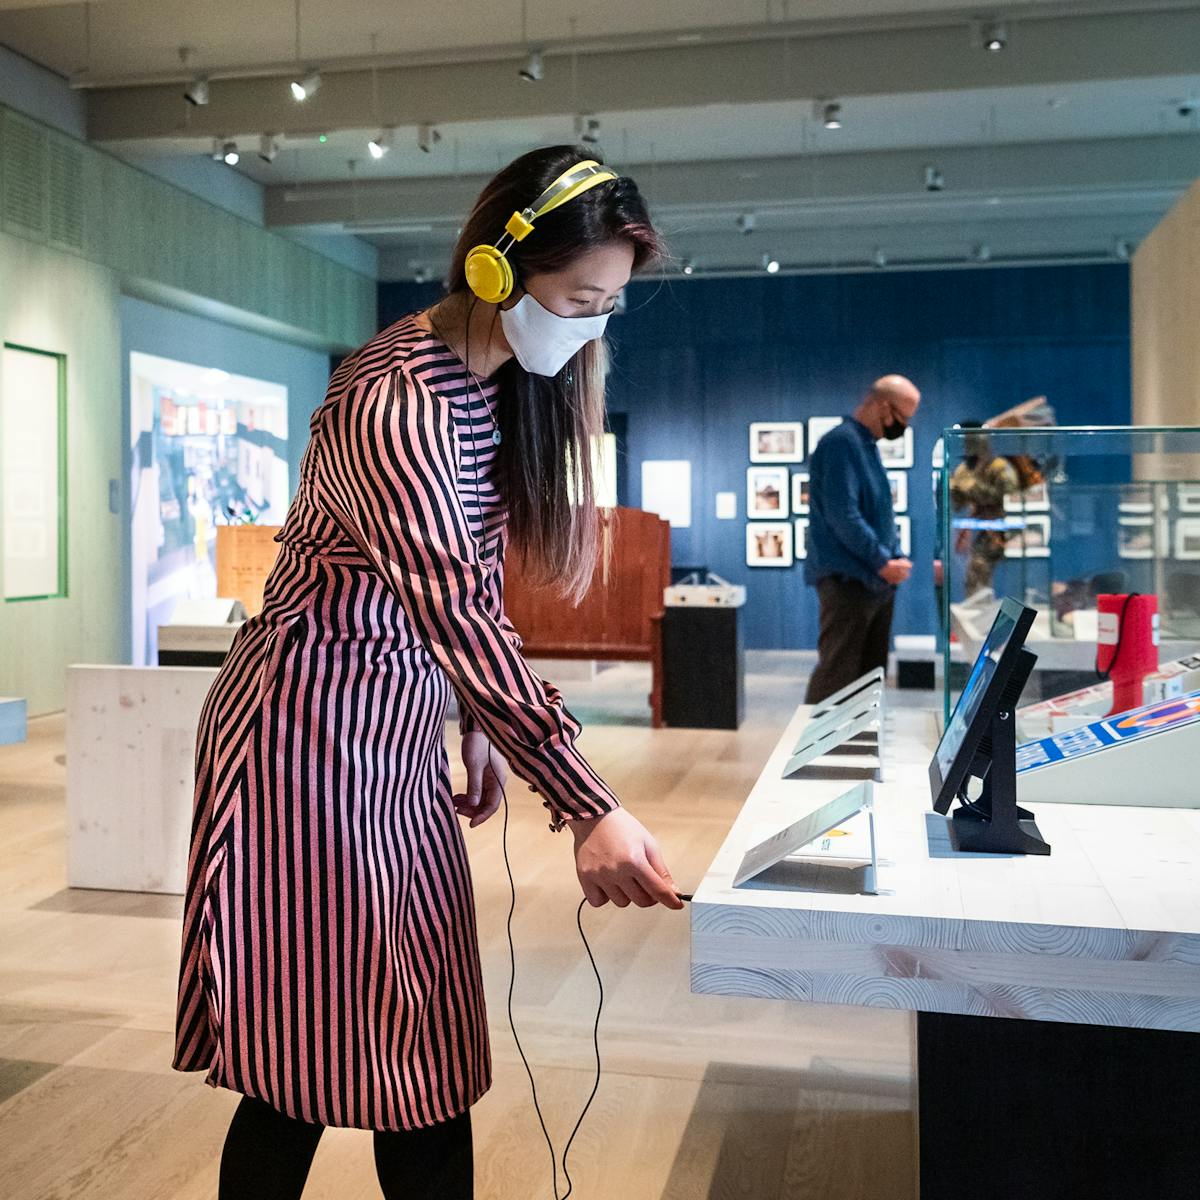 Photograph of a museum gallery space with display cases and exhibits. In the foreground is a woman wearing a face covering and a pair of yellow over the ear headphones. She is in the process of plugging the headphones into the socket of an audio exhibit. To the right of her is another woman also wearing a face covering who is looking up at a transparent model of human being. In the far distance is a man, also wearing a face covering who is exploring the exhibiton.